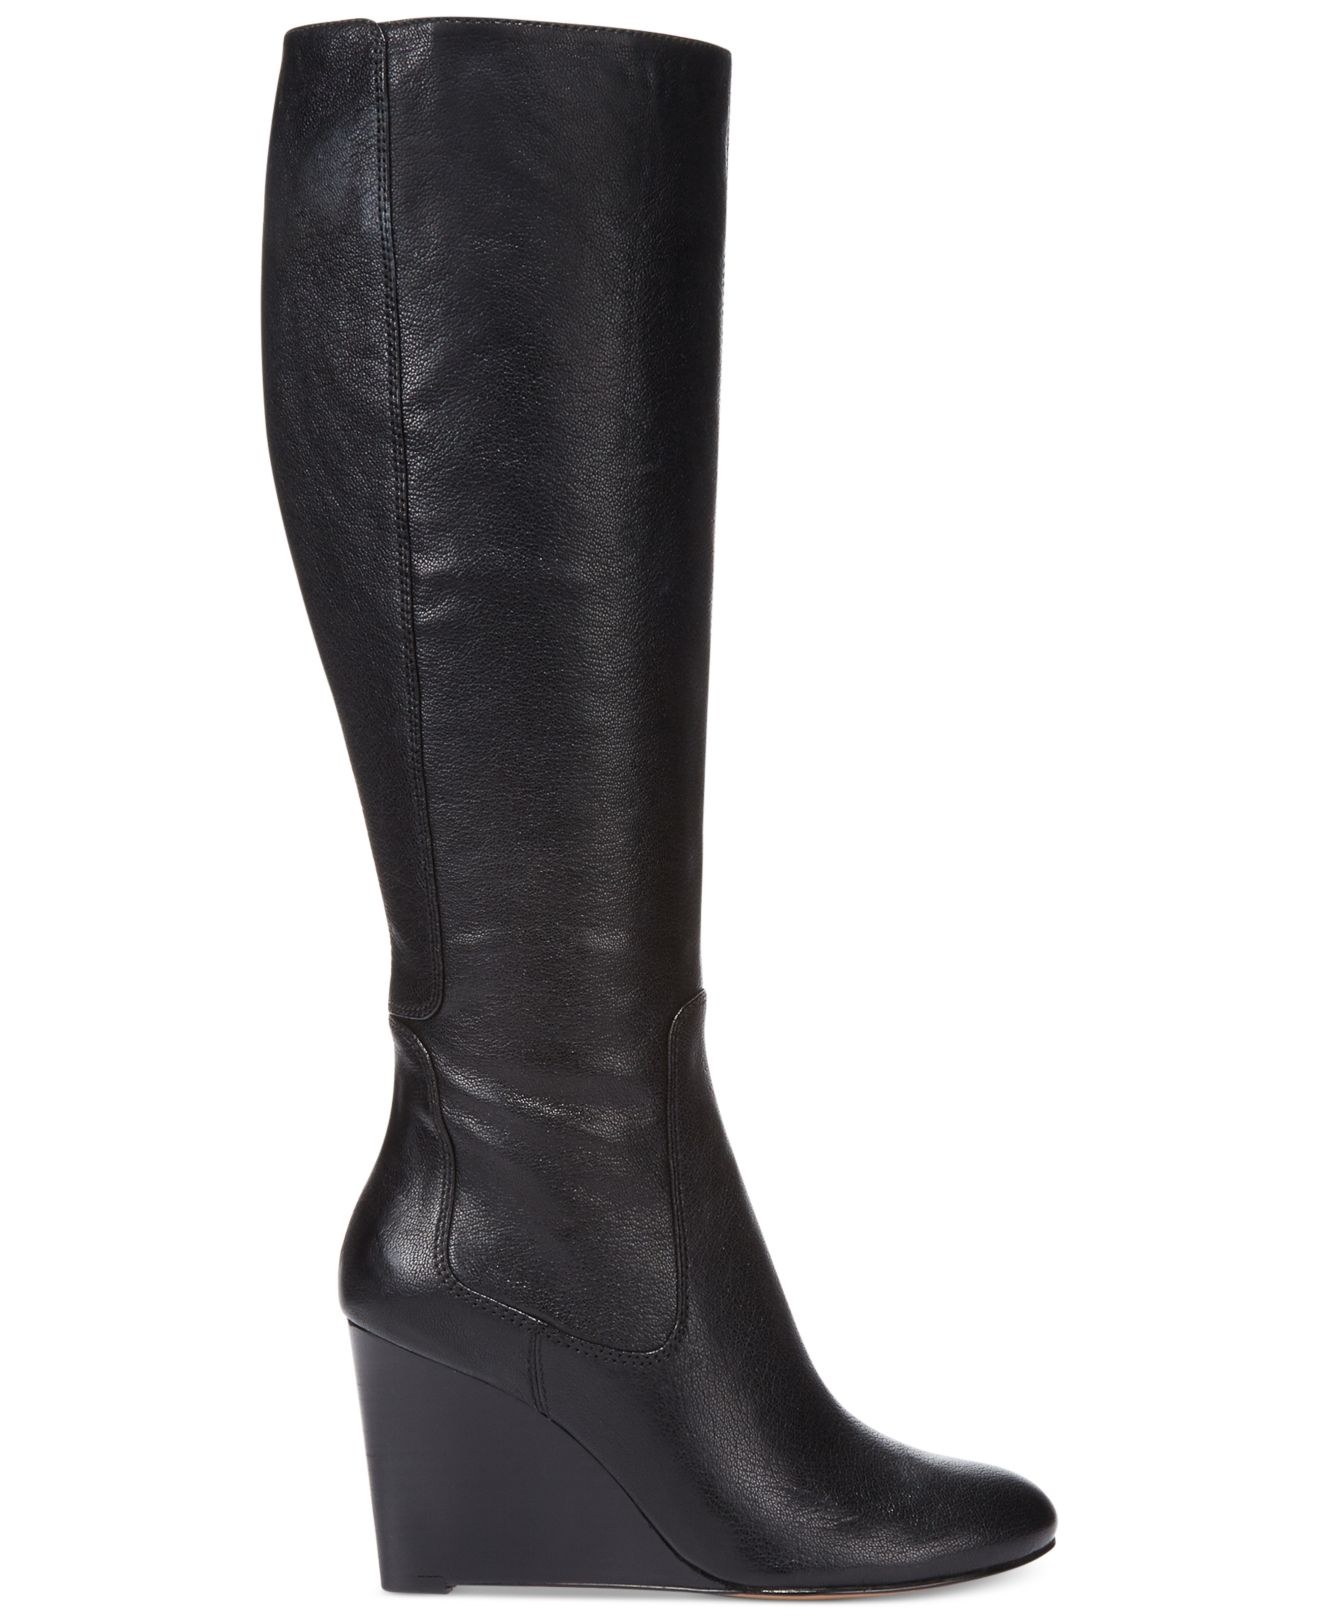 Nine West Heartset Tall Wedge Wide Calf Dress Boots in Black - Lyst